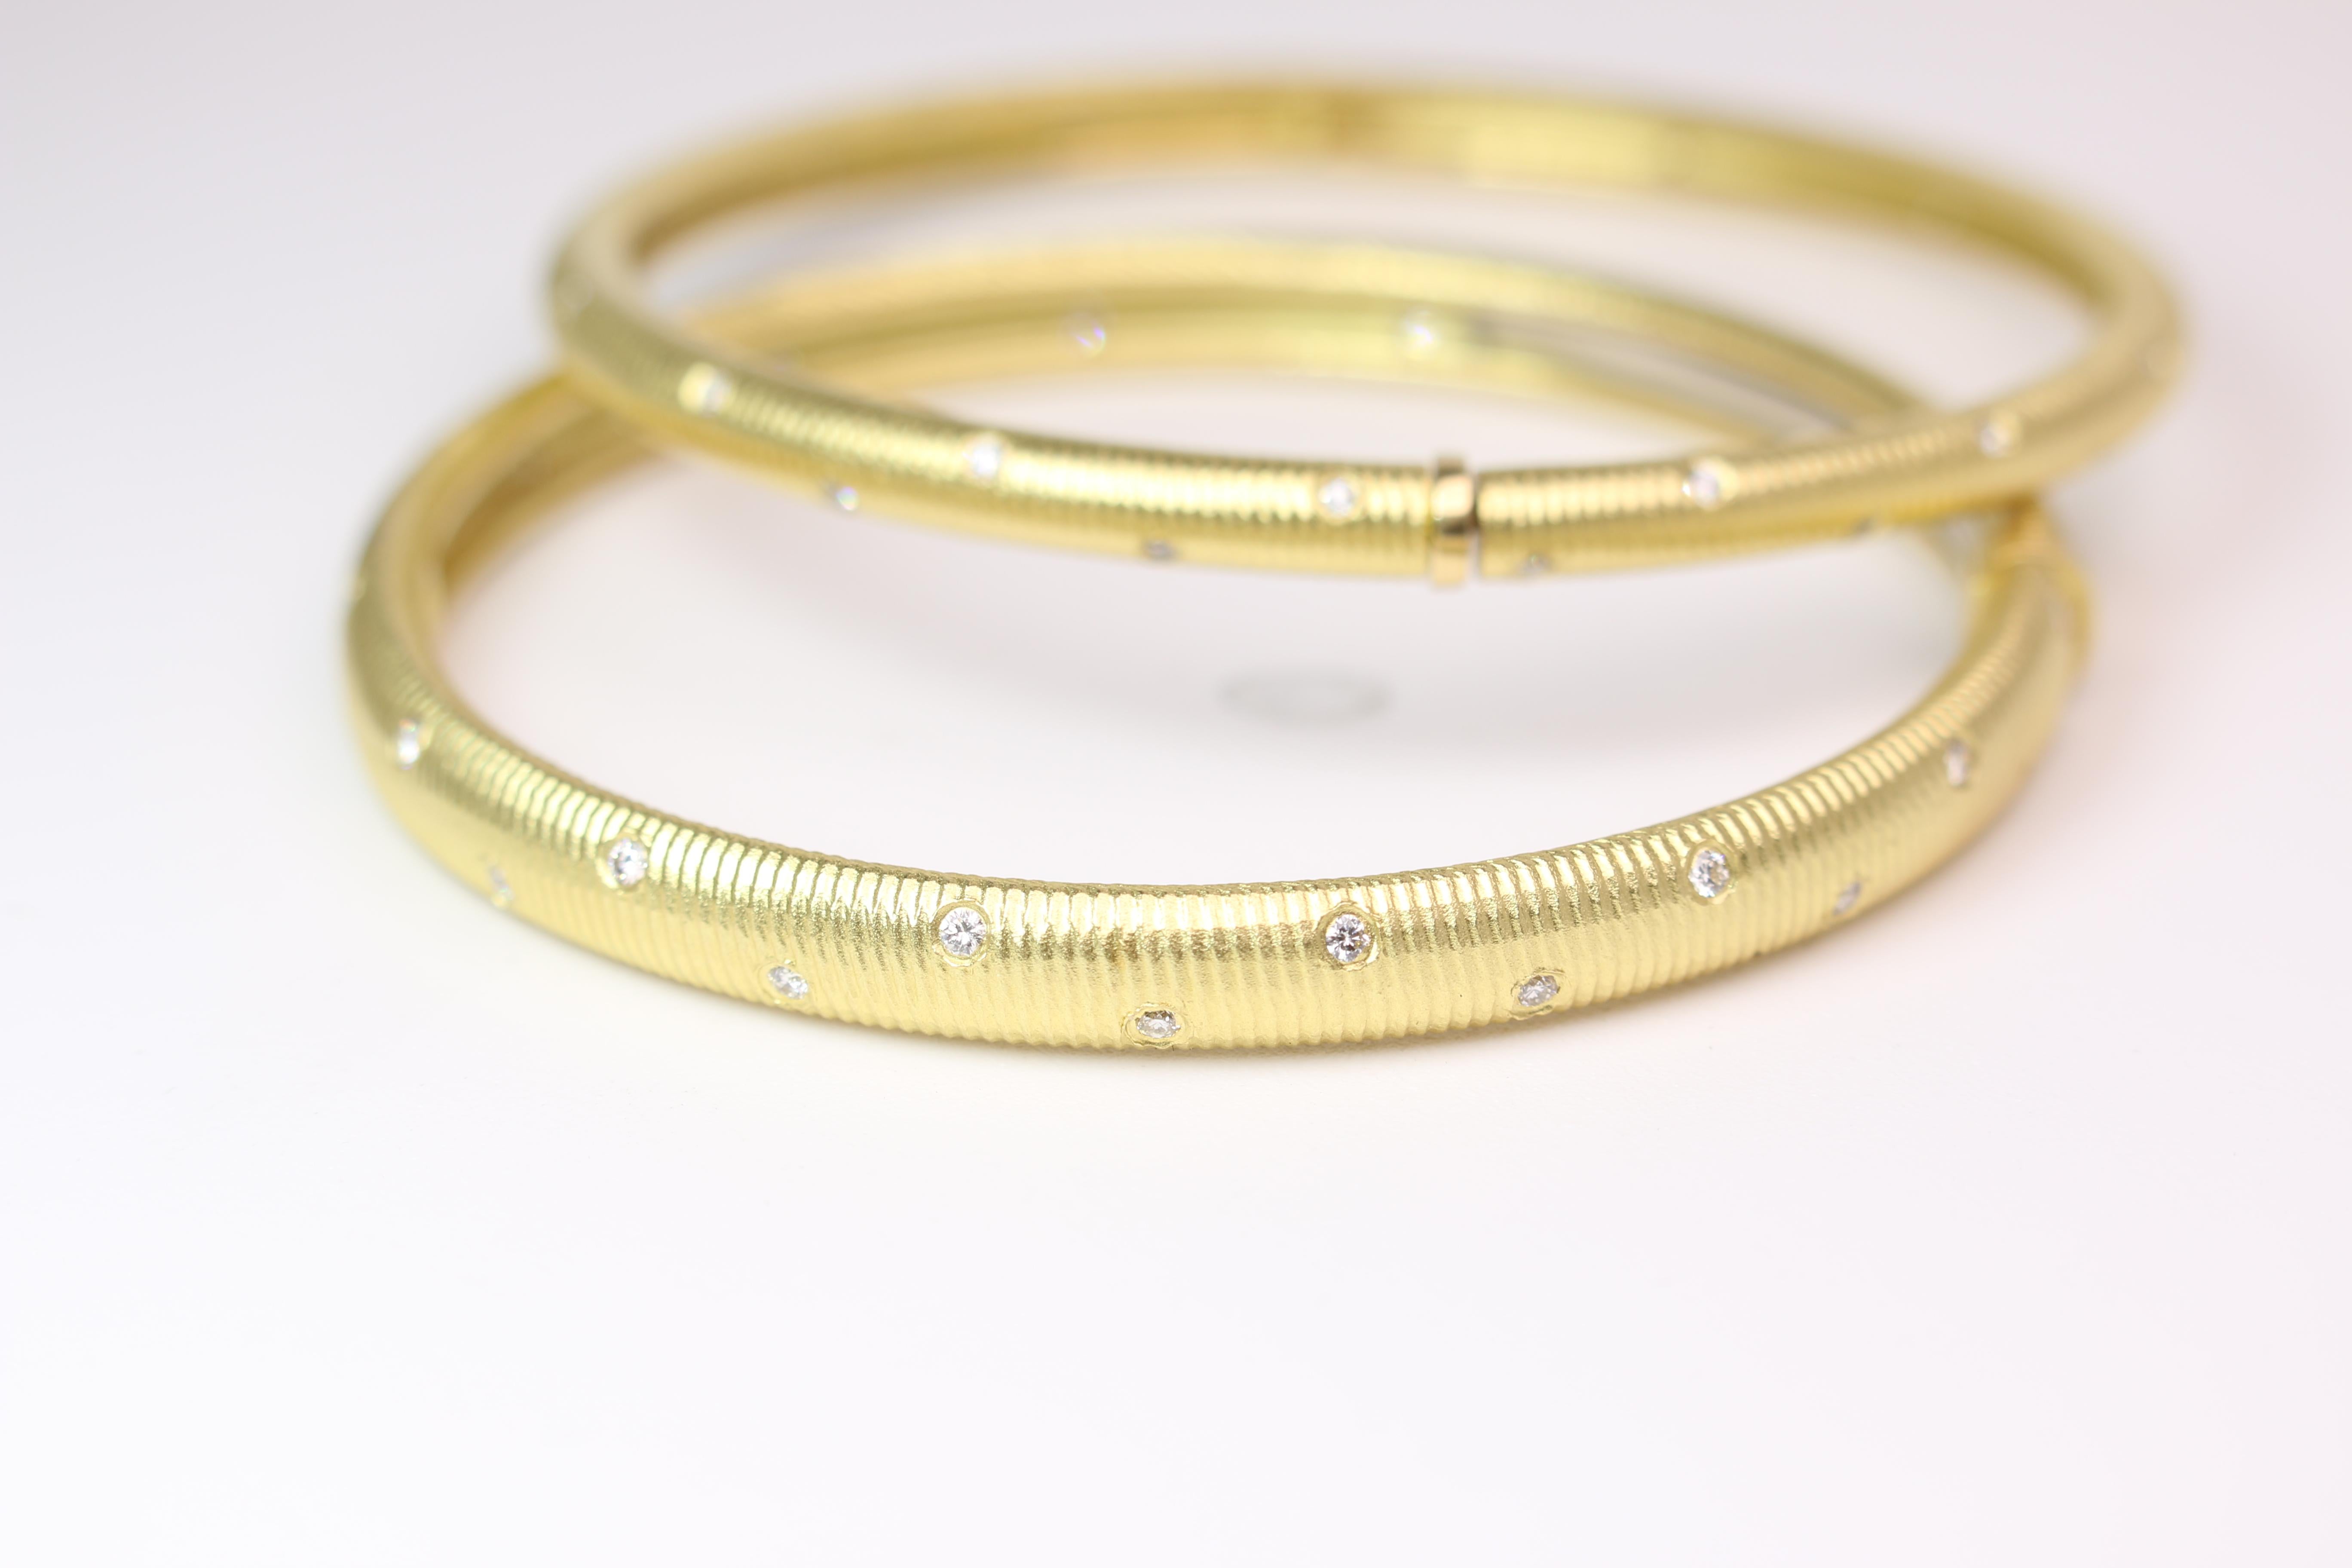 Paul Morelli bangle set in 18K yellow gold .The bangles have a ribbed finish and are accented with brilliant round cut diamonds. An expandable mechanism allows for the bangles to comfortably slide on and off. One bangle has an approximate width of